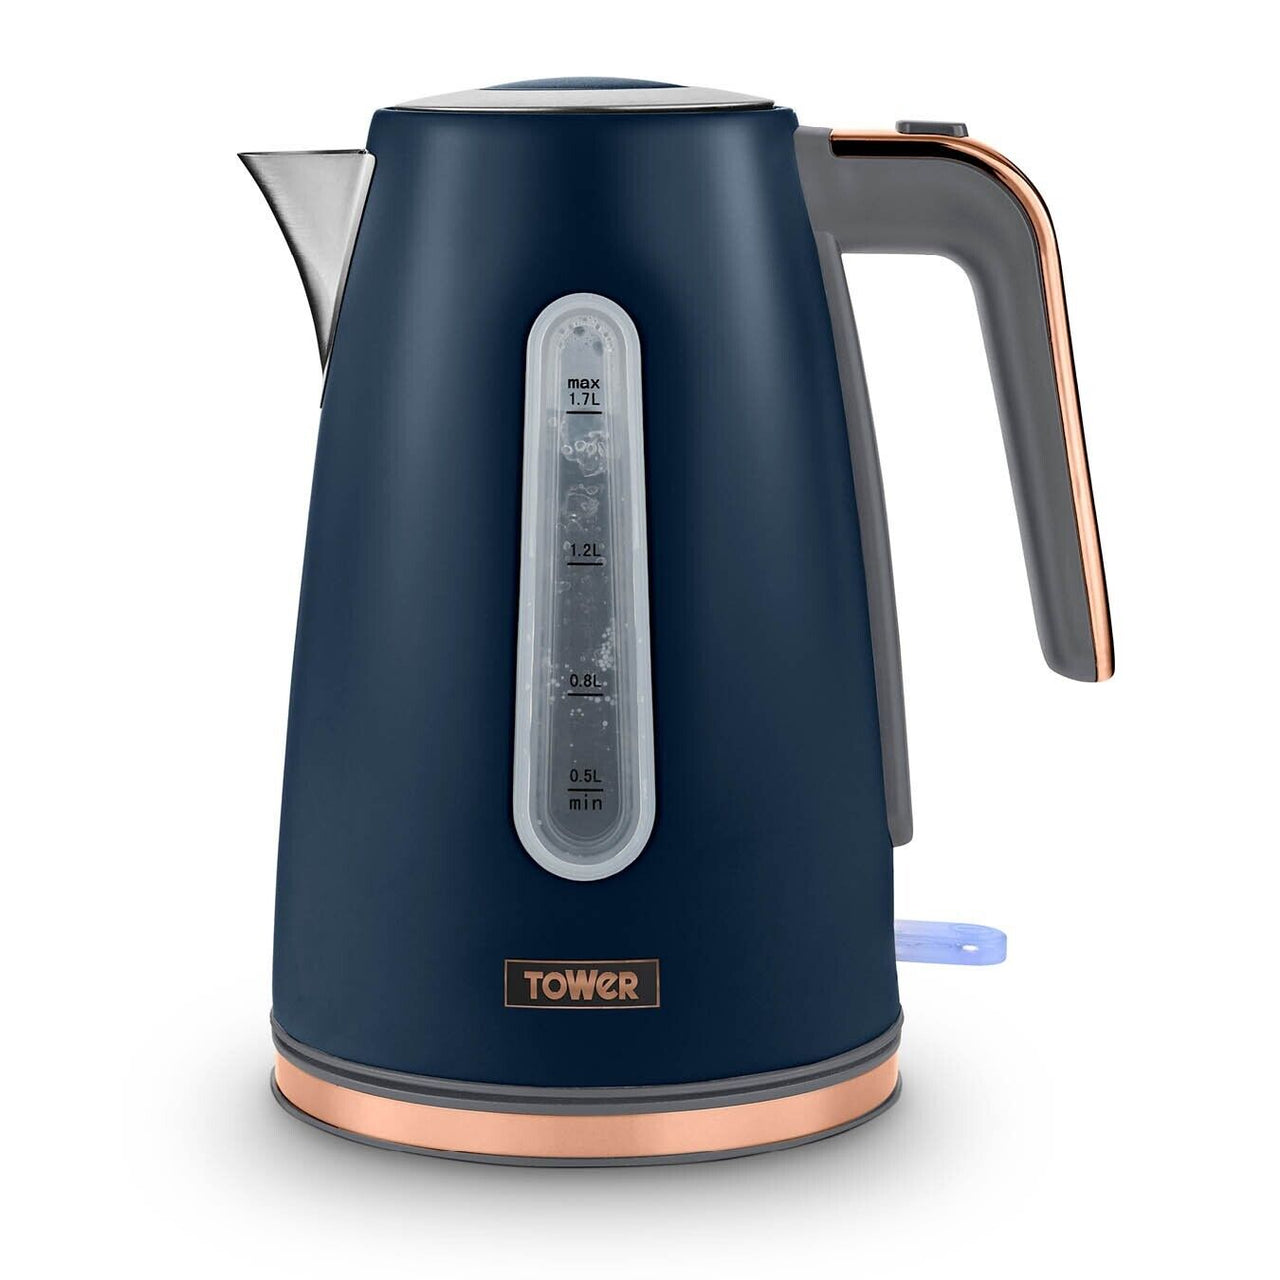 Tower Cavaletto 3KW 1.7L Jug Kettle Midnight Blue & Rose Gold - 3 Year Gurantee